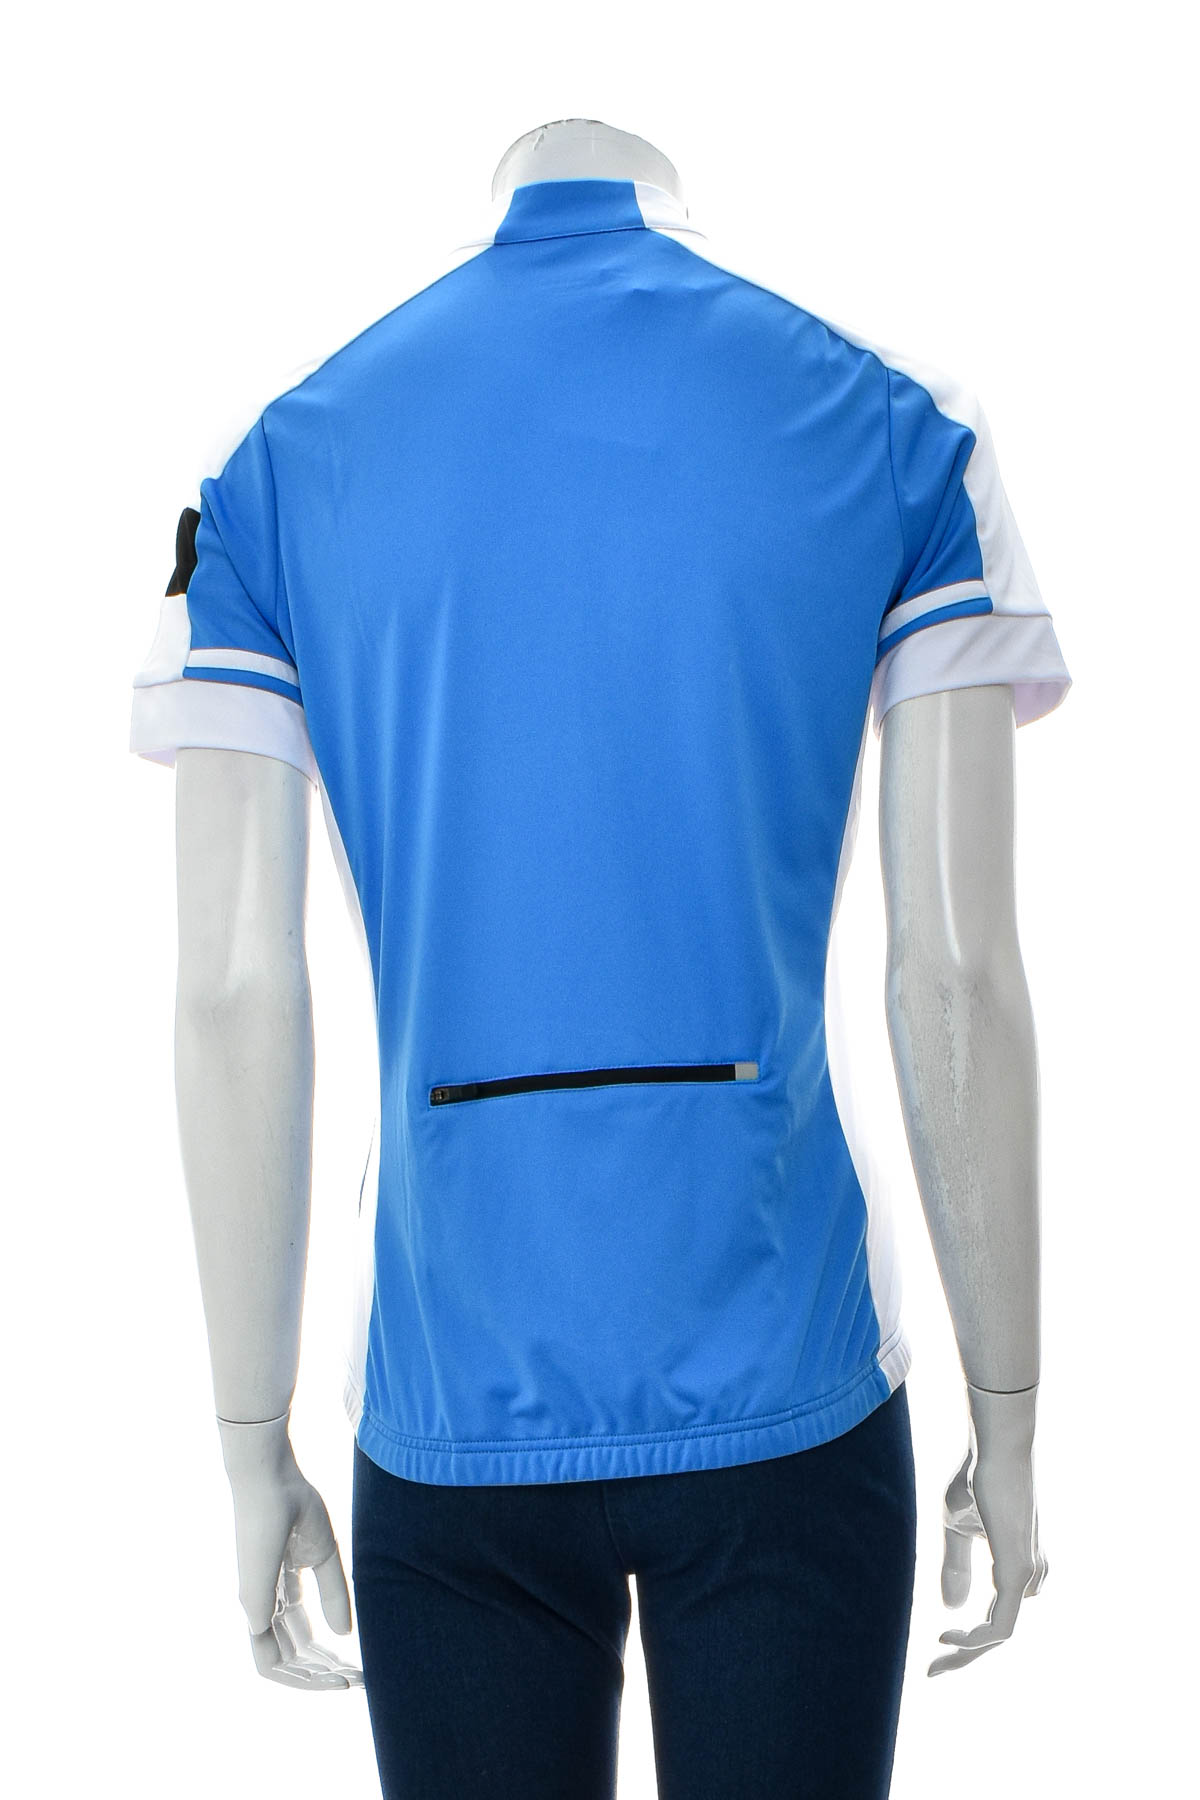 Female sports top for cycling - James & Nicholson - 1